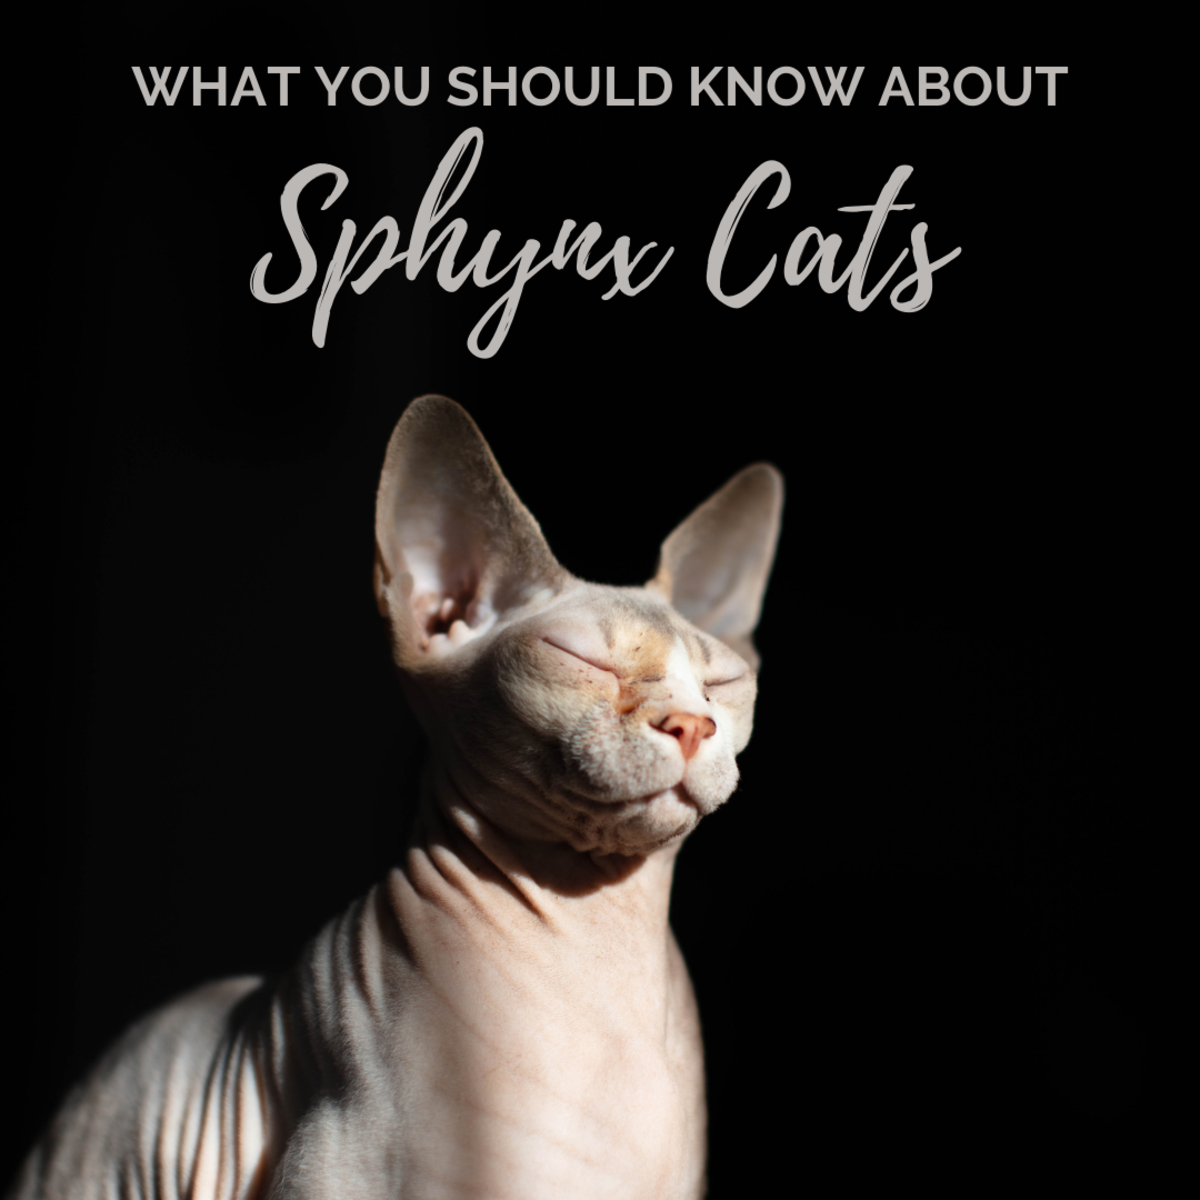 https://images.saymedia-content.com/.image/t_share/MTgwMDUwODY0NTY2NzA3MzIy/sphynx-cats.png